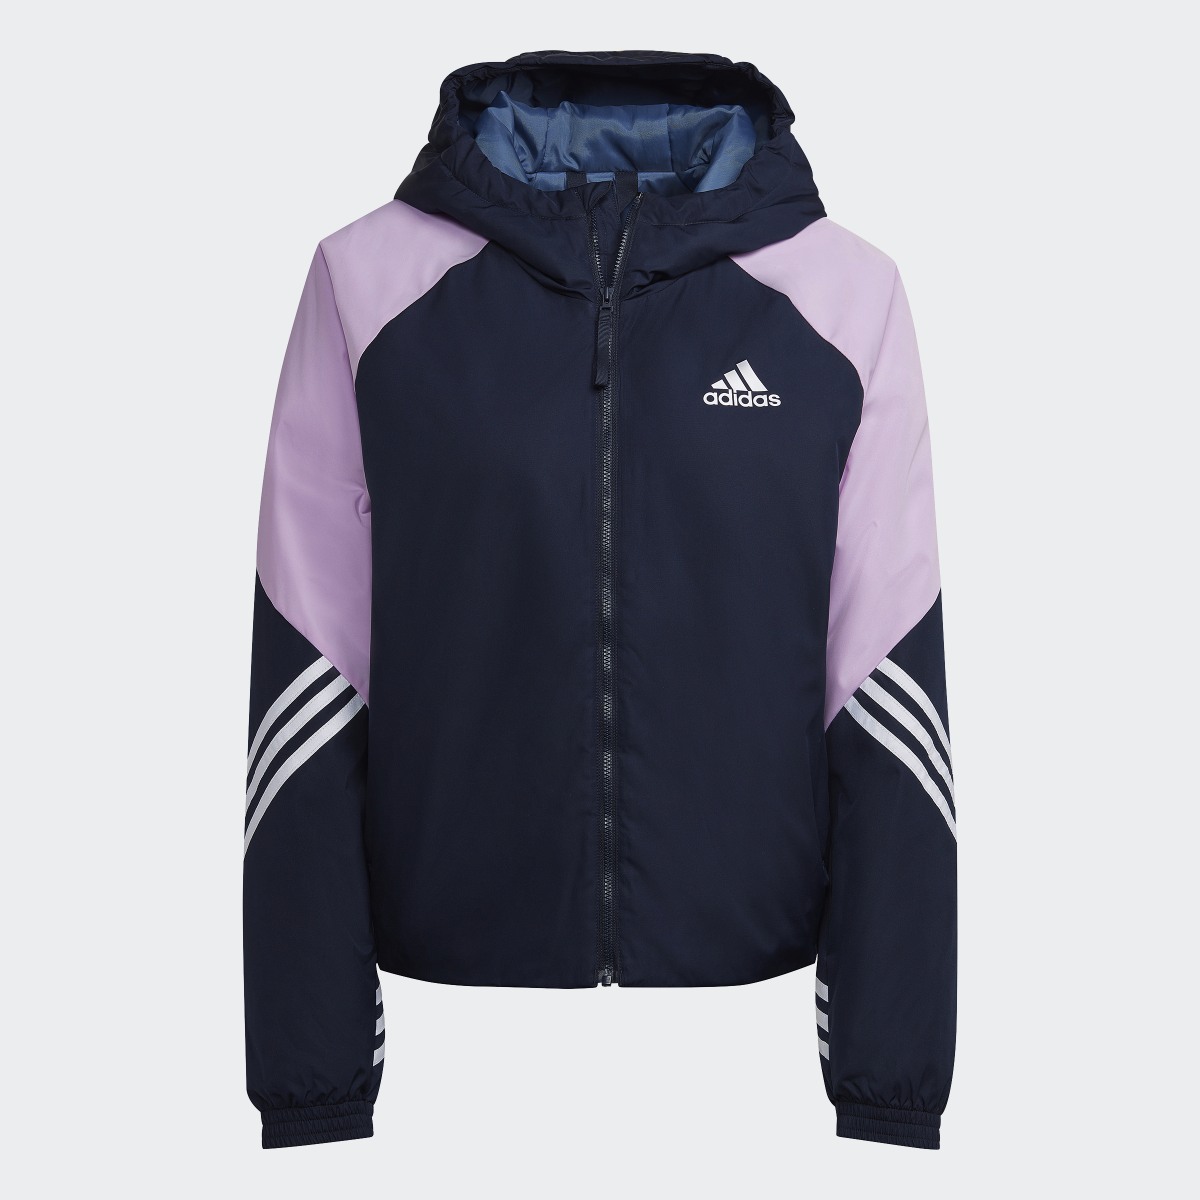 Adidas Back to Sport Hooded Jacket. 4